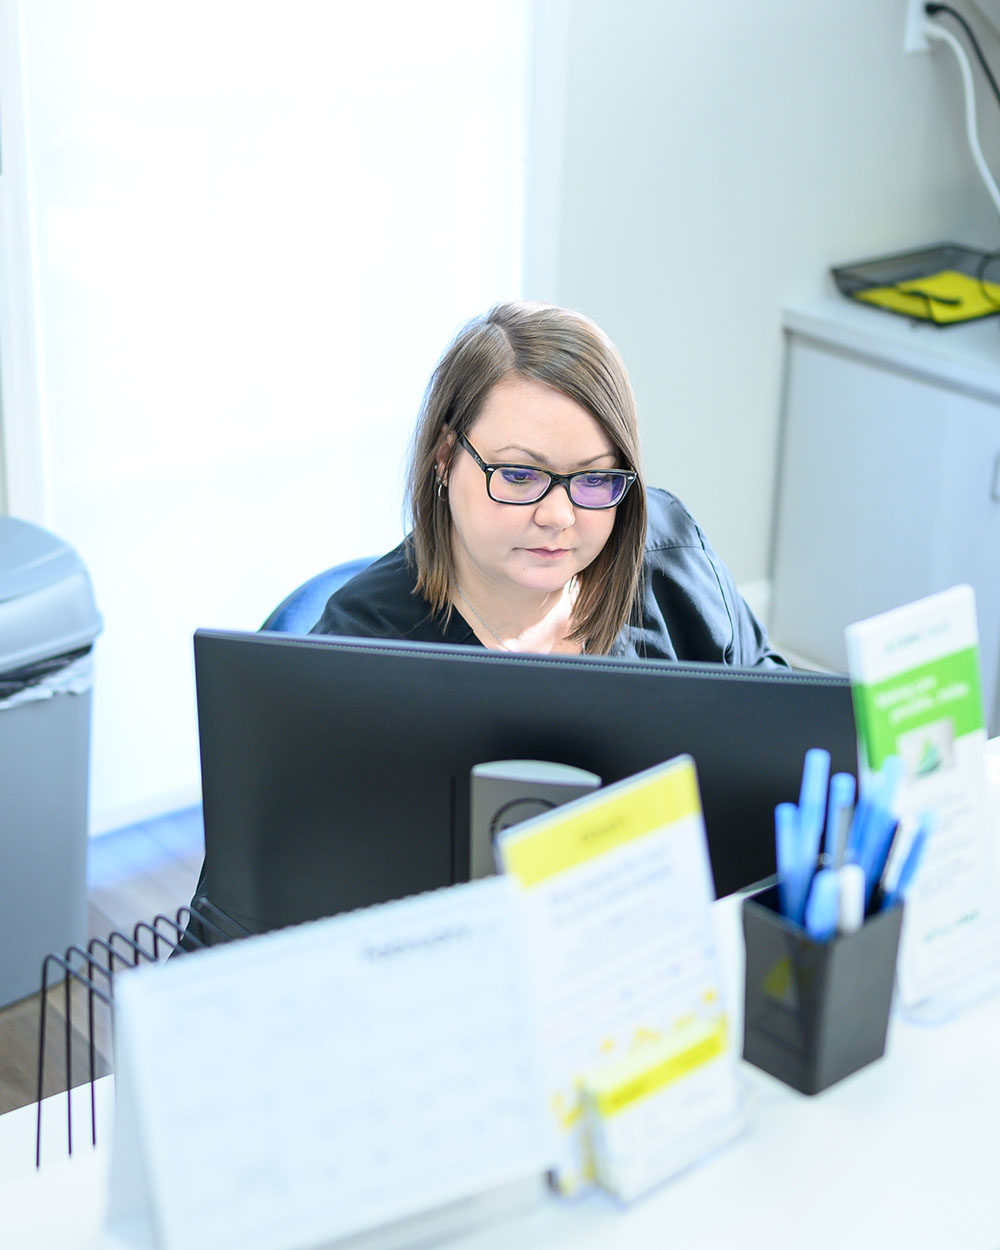 A LaGrange Oral Surgery and Implant Center staff member works on patient paperwork.